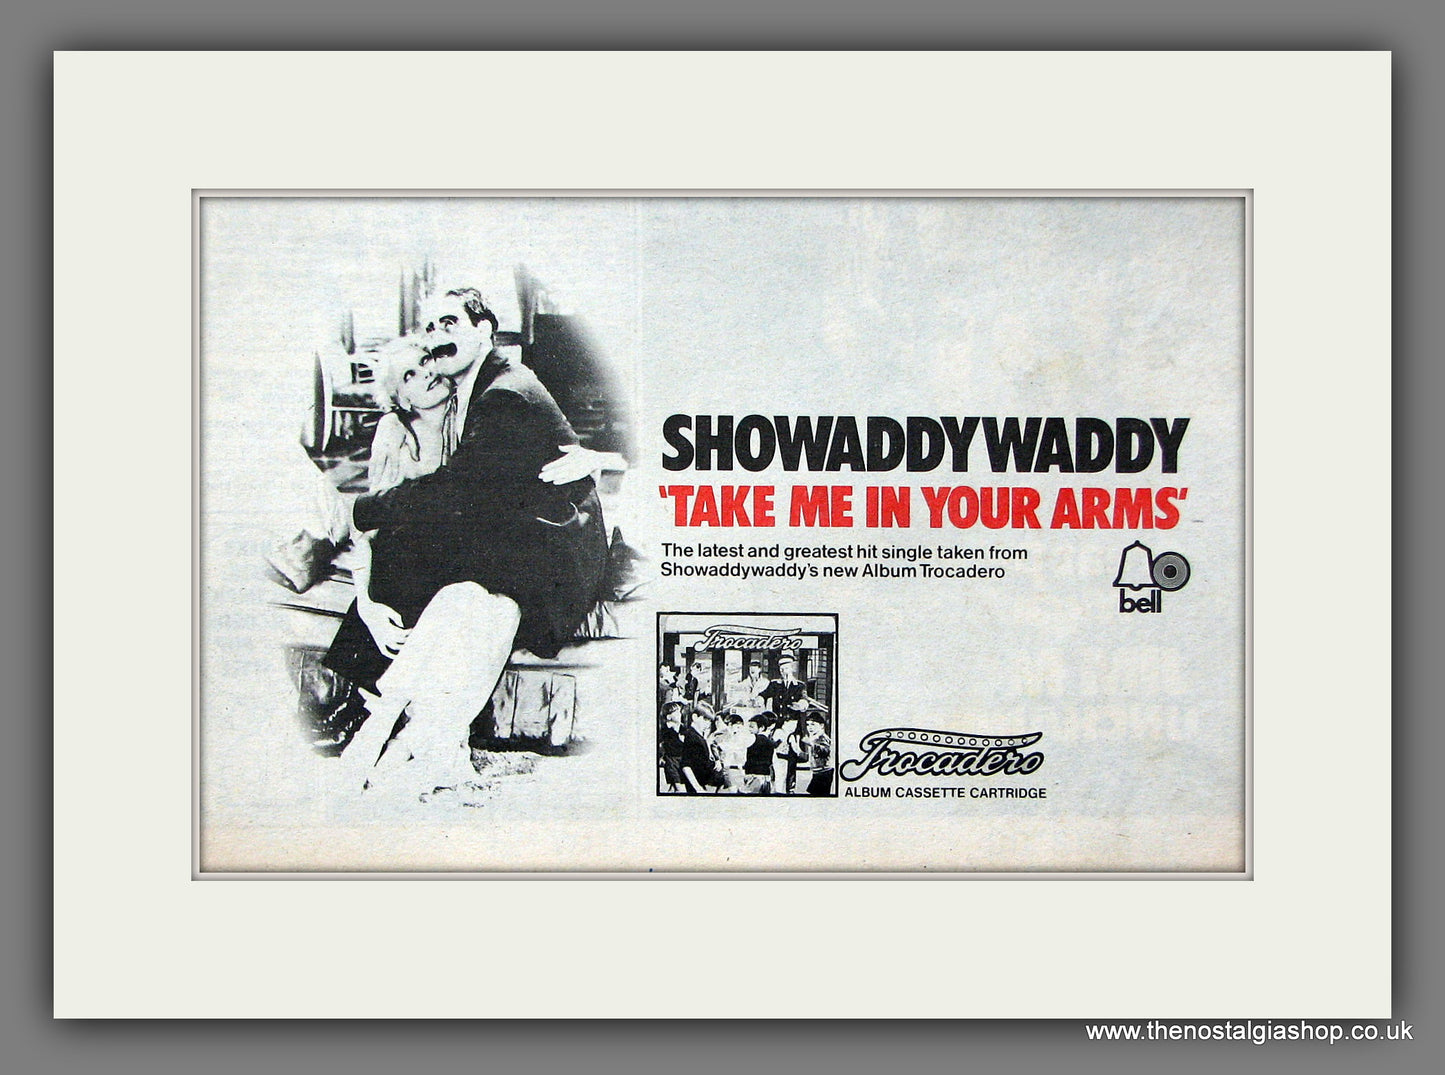 Showaddywaddy. Take Me In Your Arms. Original Vintage Advert 1976 (ref AD56361)